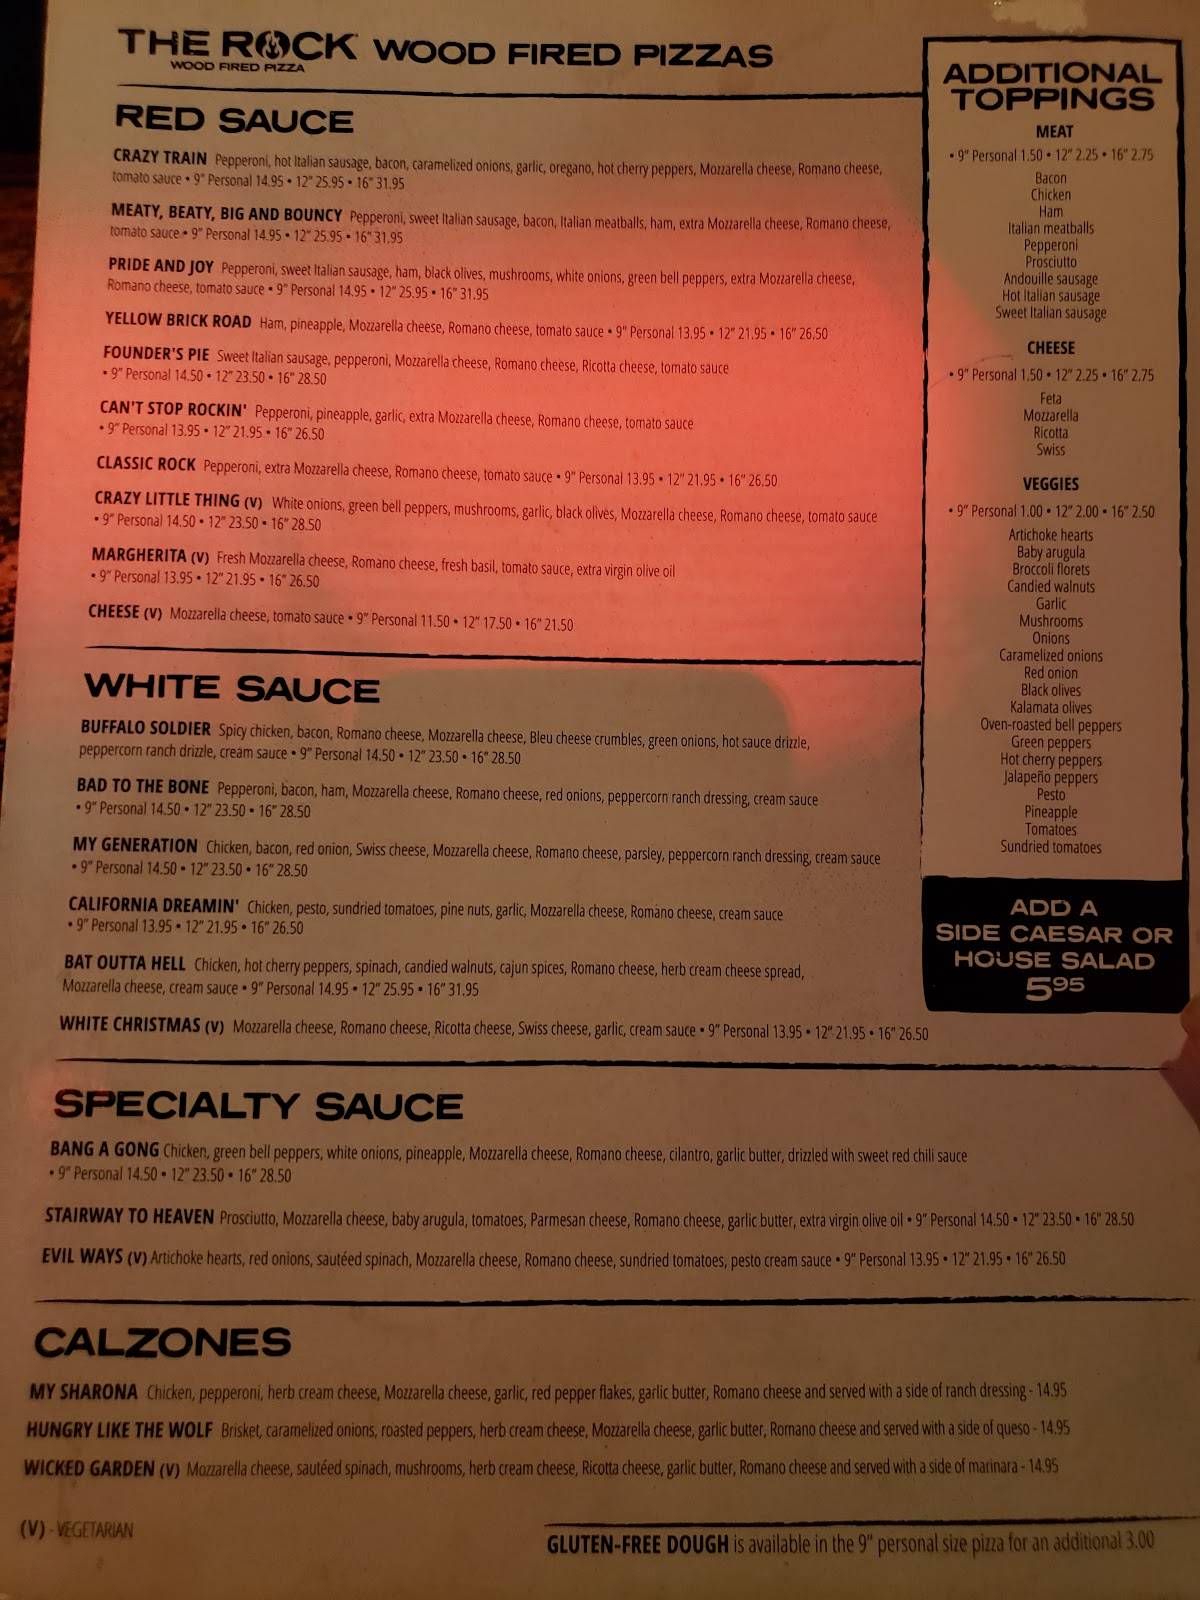 THE ROCK WOOD FIRED PIZZA, Covington - Menu, Prices & Restaurant